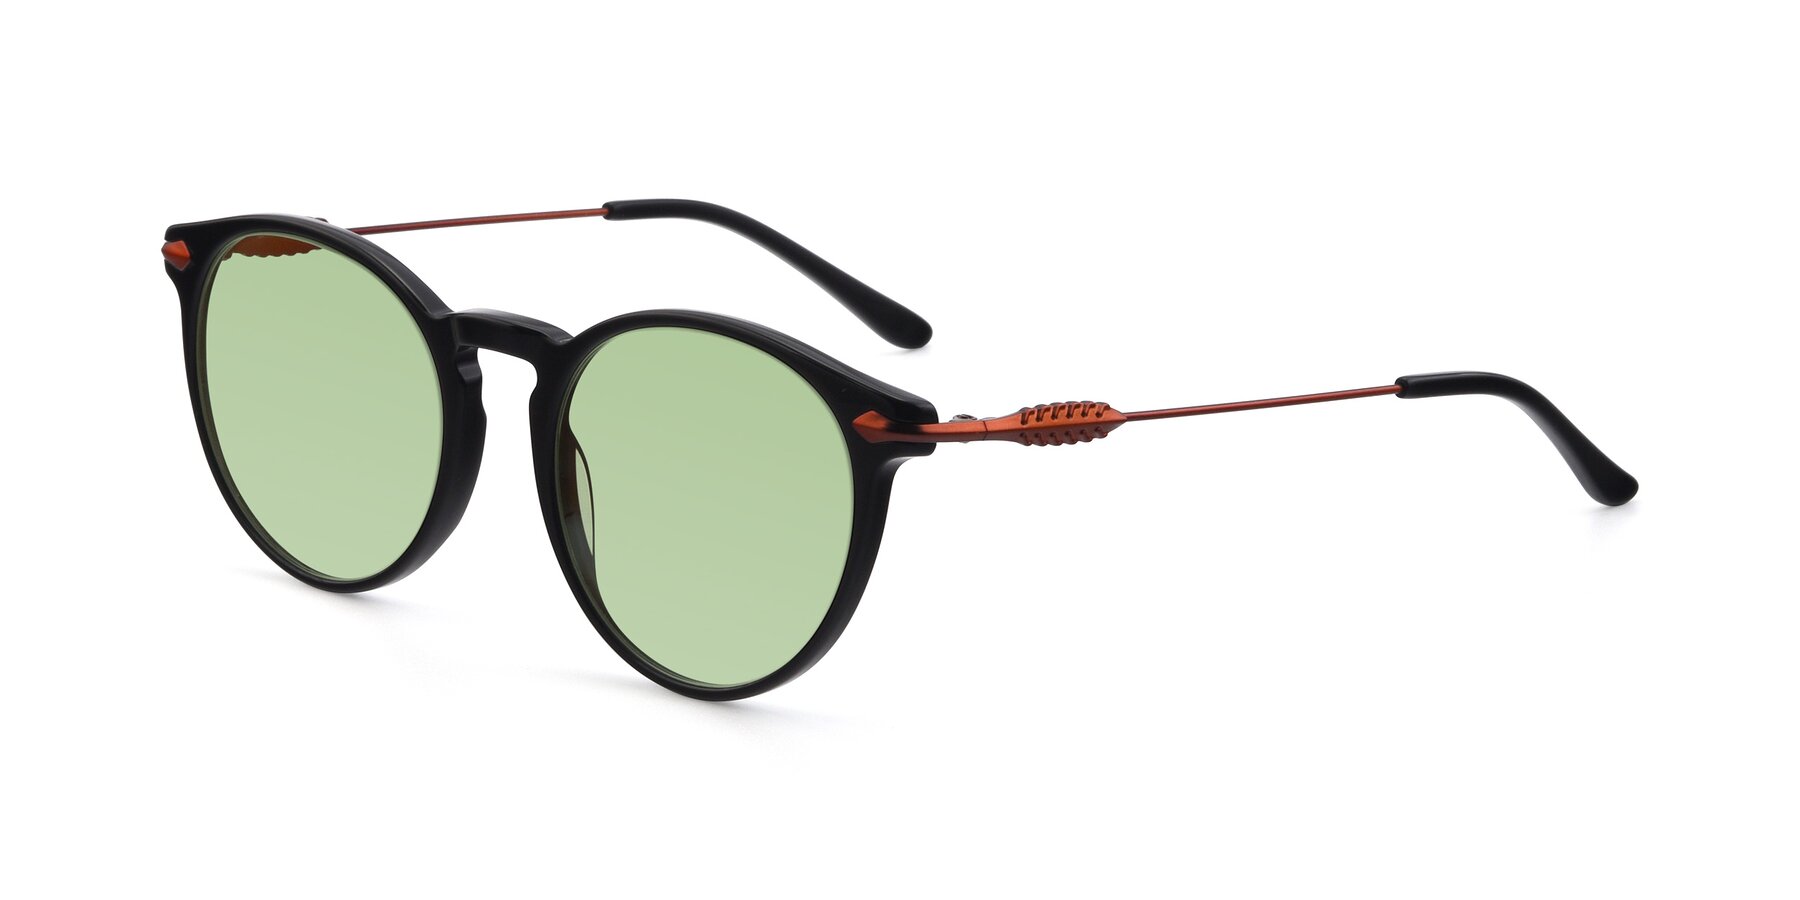 Angle of 17660 in Black with Medium Green Tinted Lenses